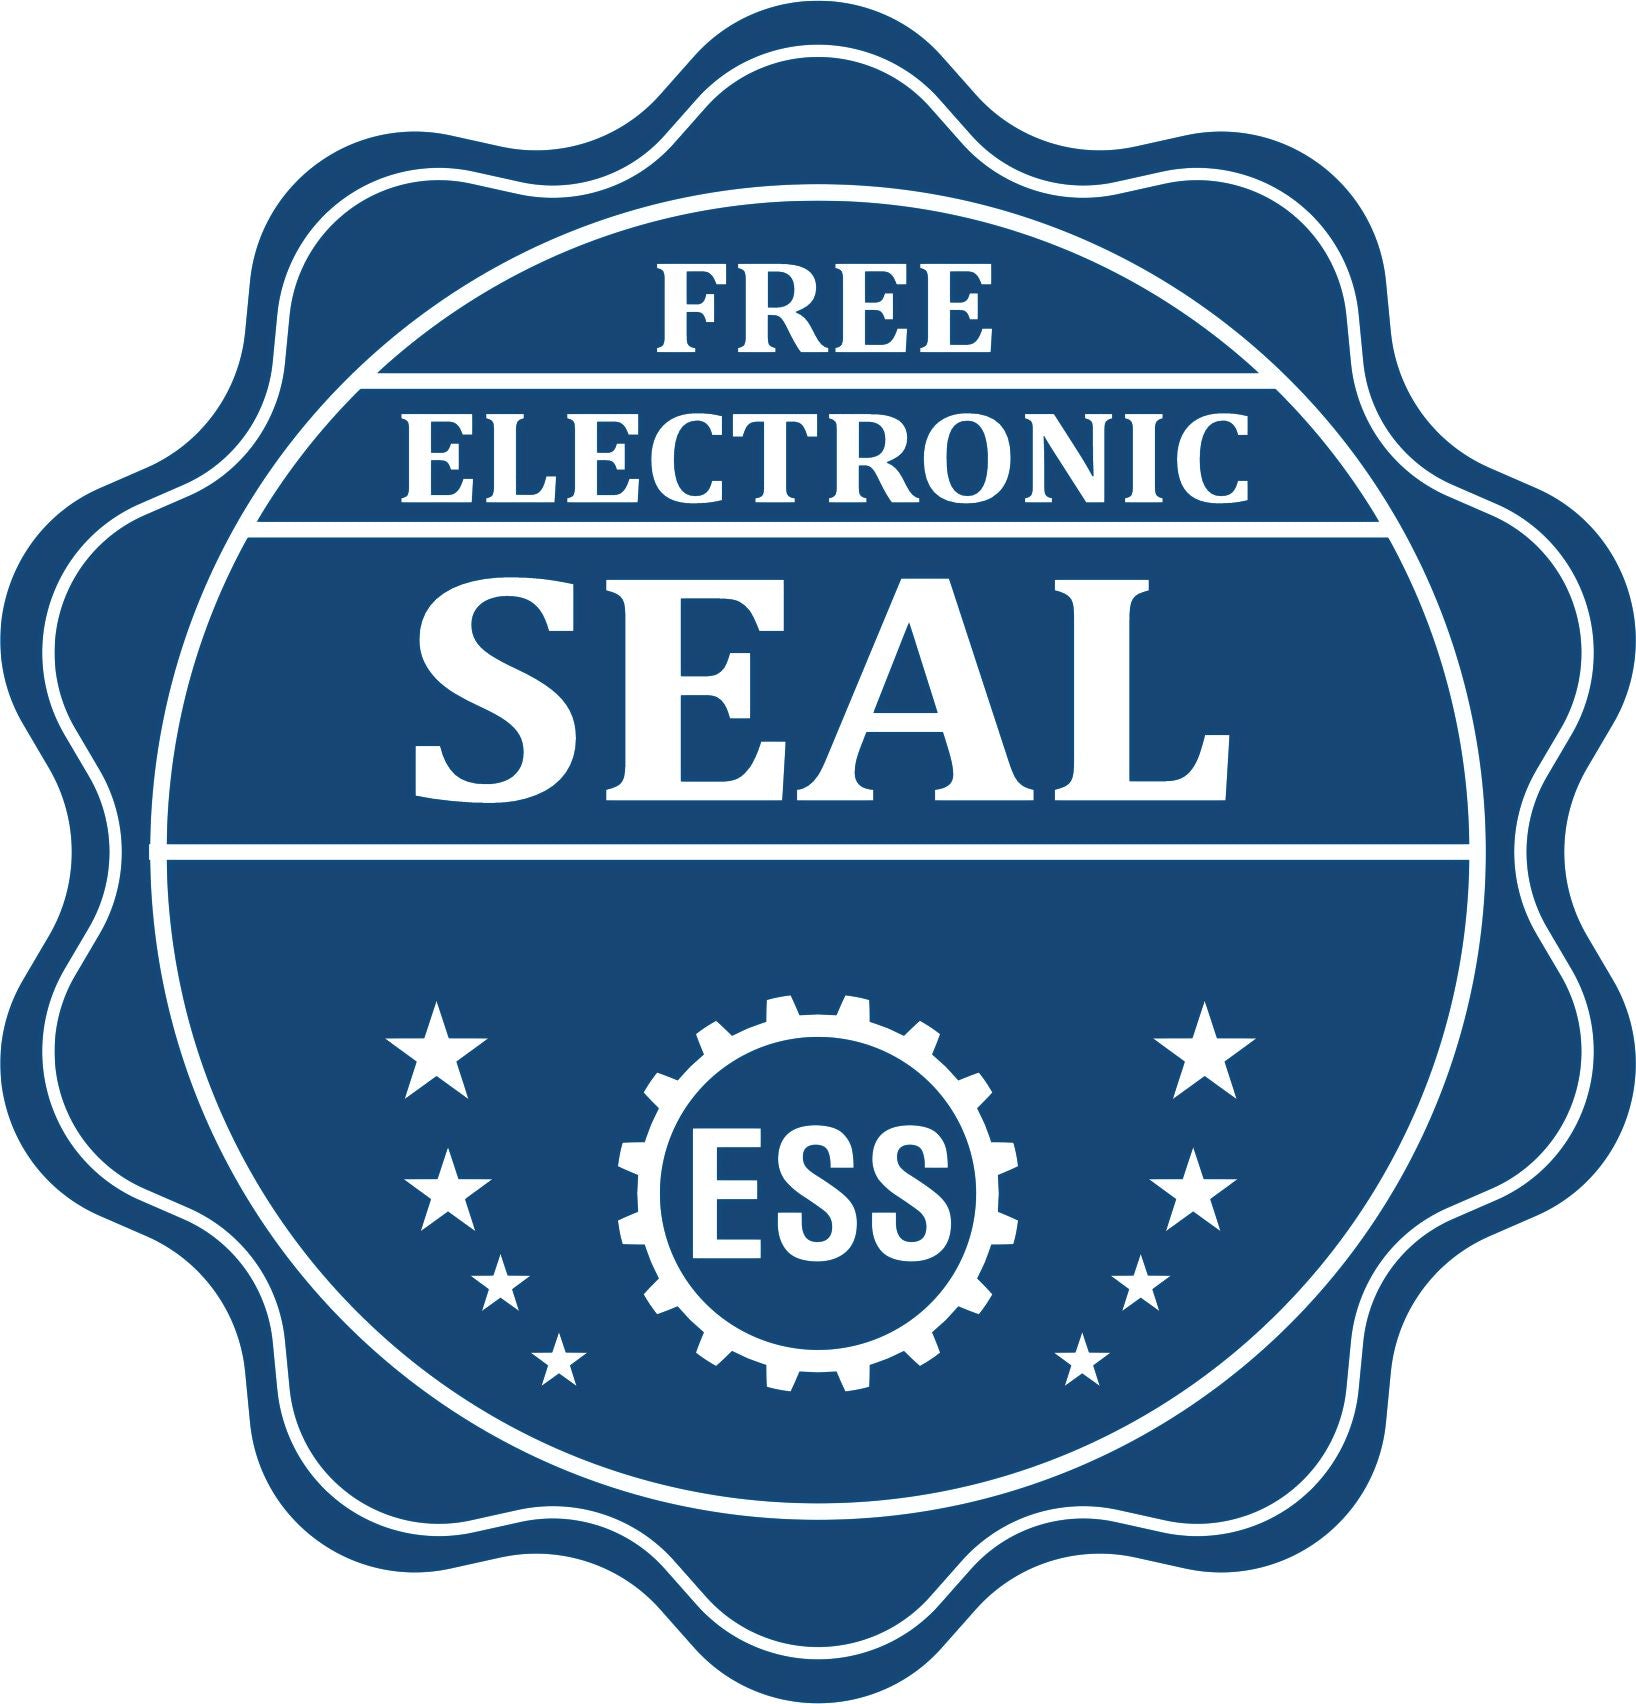 A badge showing a free electronic seal for the Extended Long Reach Virginia Surveyor Embosser with stars and the ESS gear on the emblem.